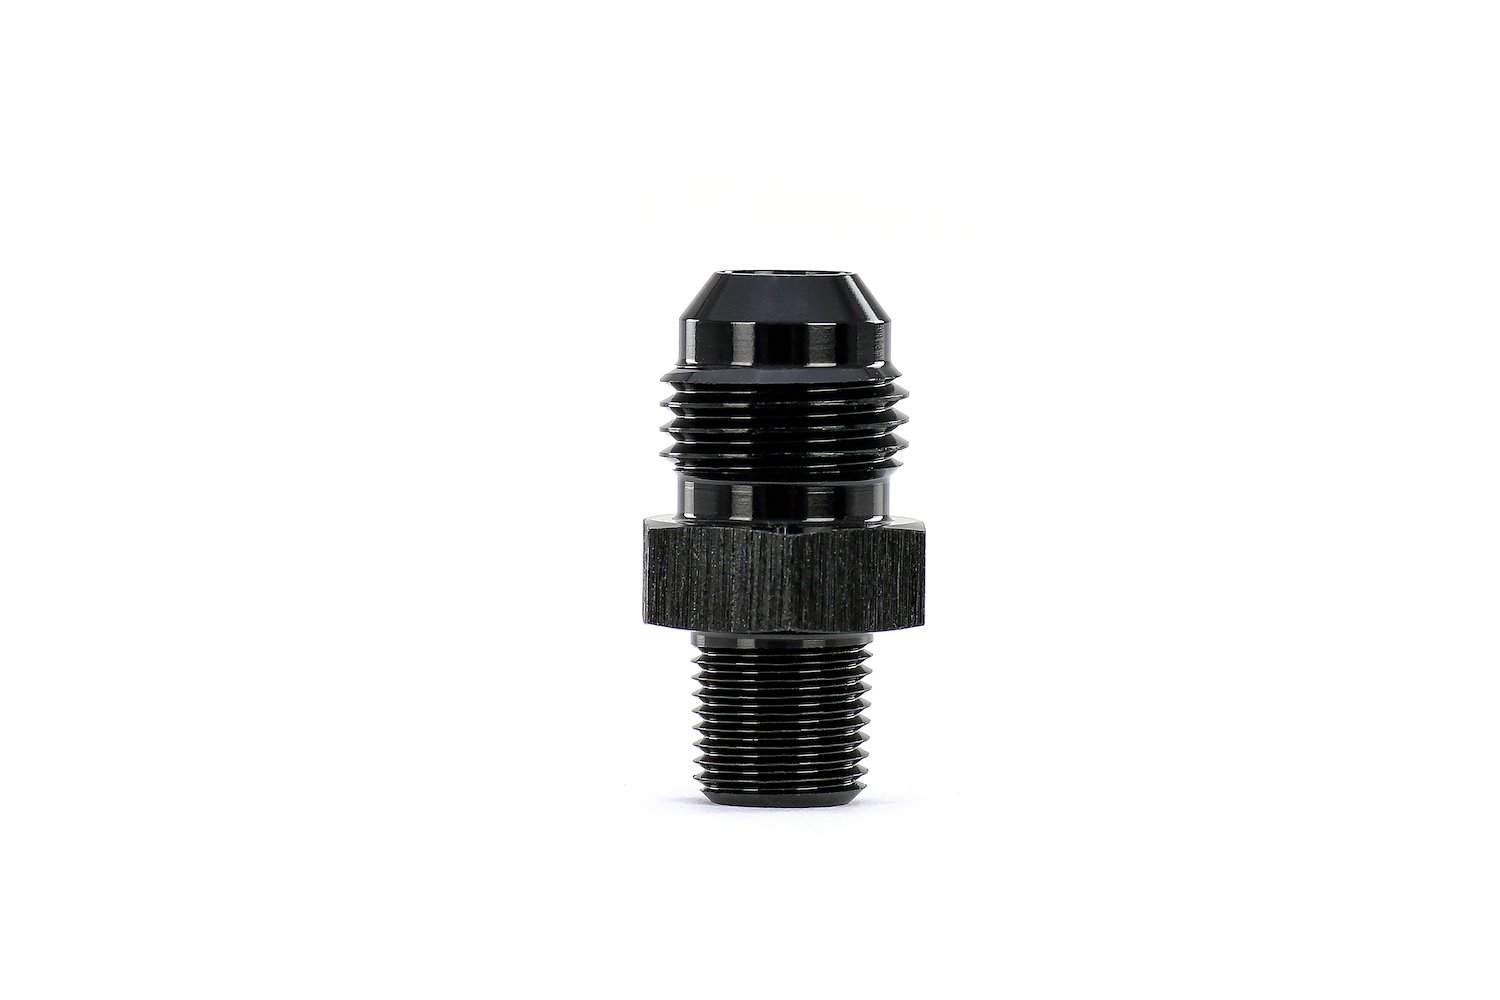 AN81662 AN Flare to NPT Straight Adapter, Convert from NPT Pipe Thread To An Flare